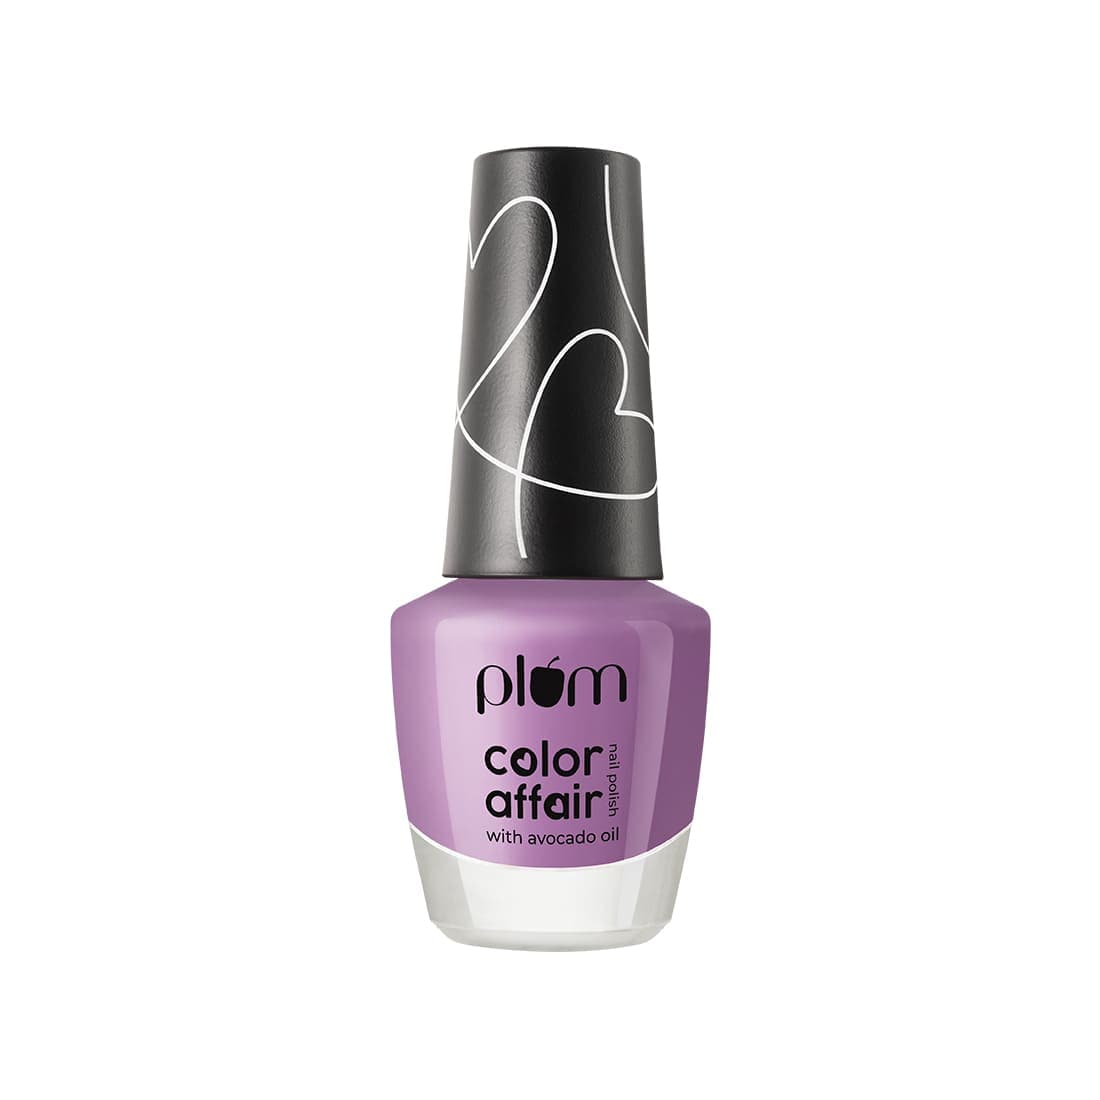 What's the best nail polish to wear with a purple dress? - Quora